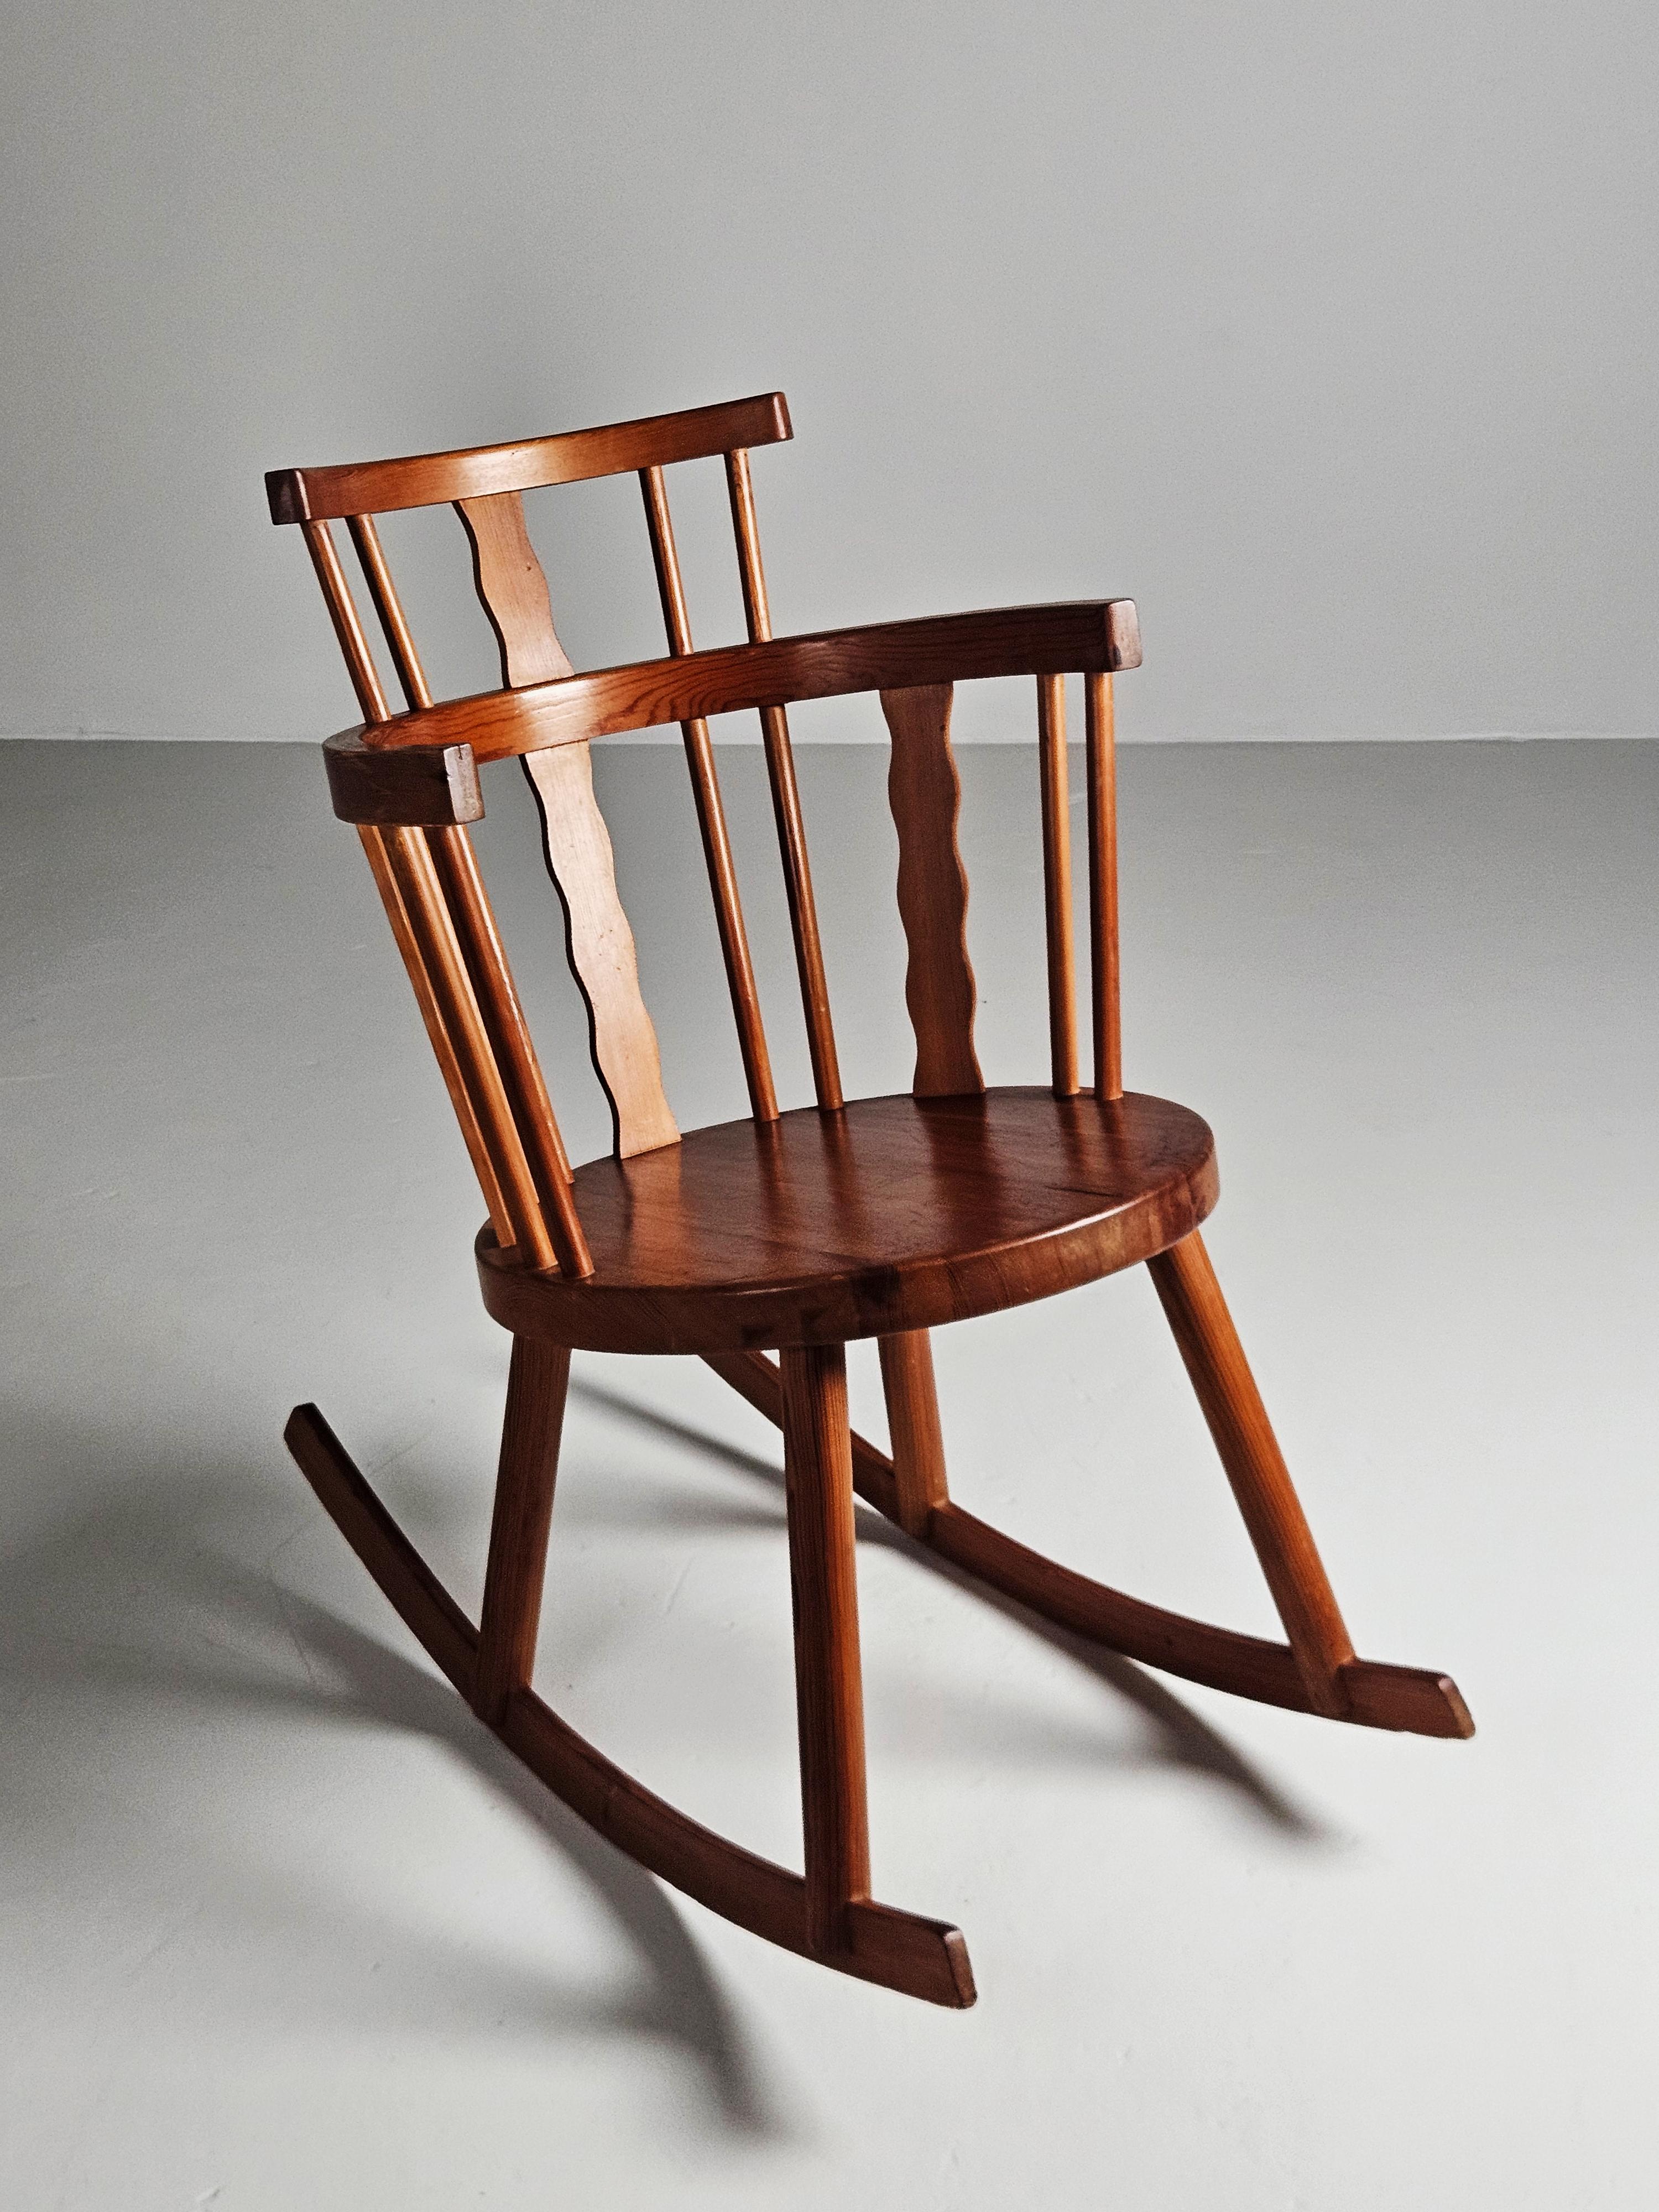 Rocking chair designed by Torsten Claeson who was one of the designers at Steneby Hemslöjd in the middle of the 20th century. 

Made in pine.

Fits very well with other Swedish sports cabin furniture as those designed by Axel Einar Hjorth. 

